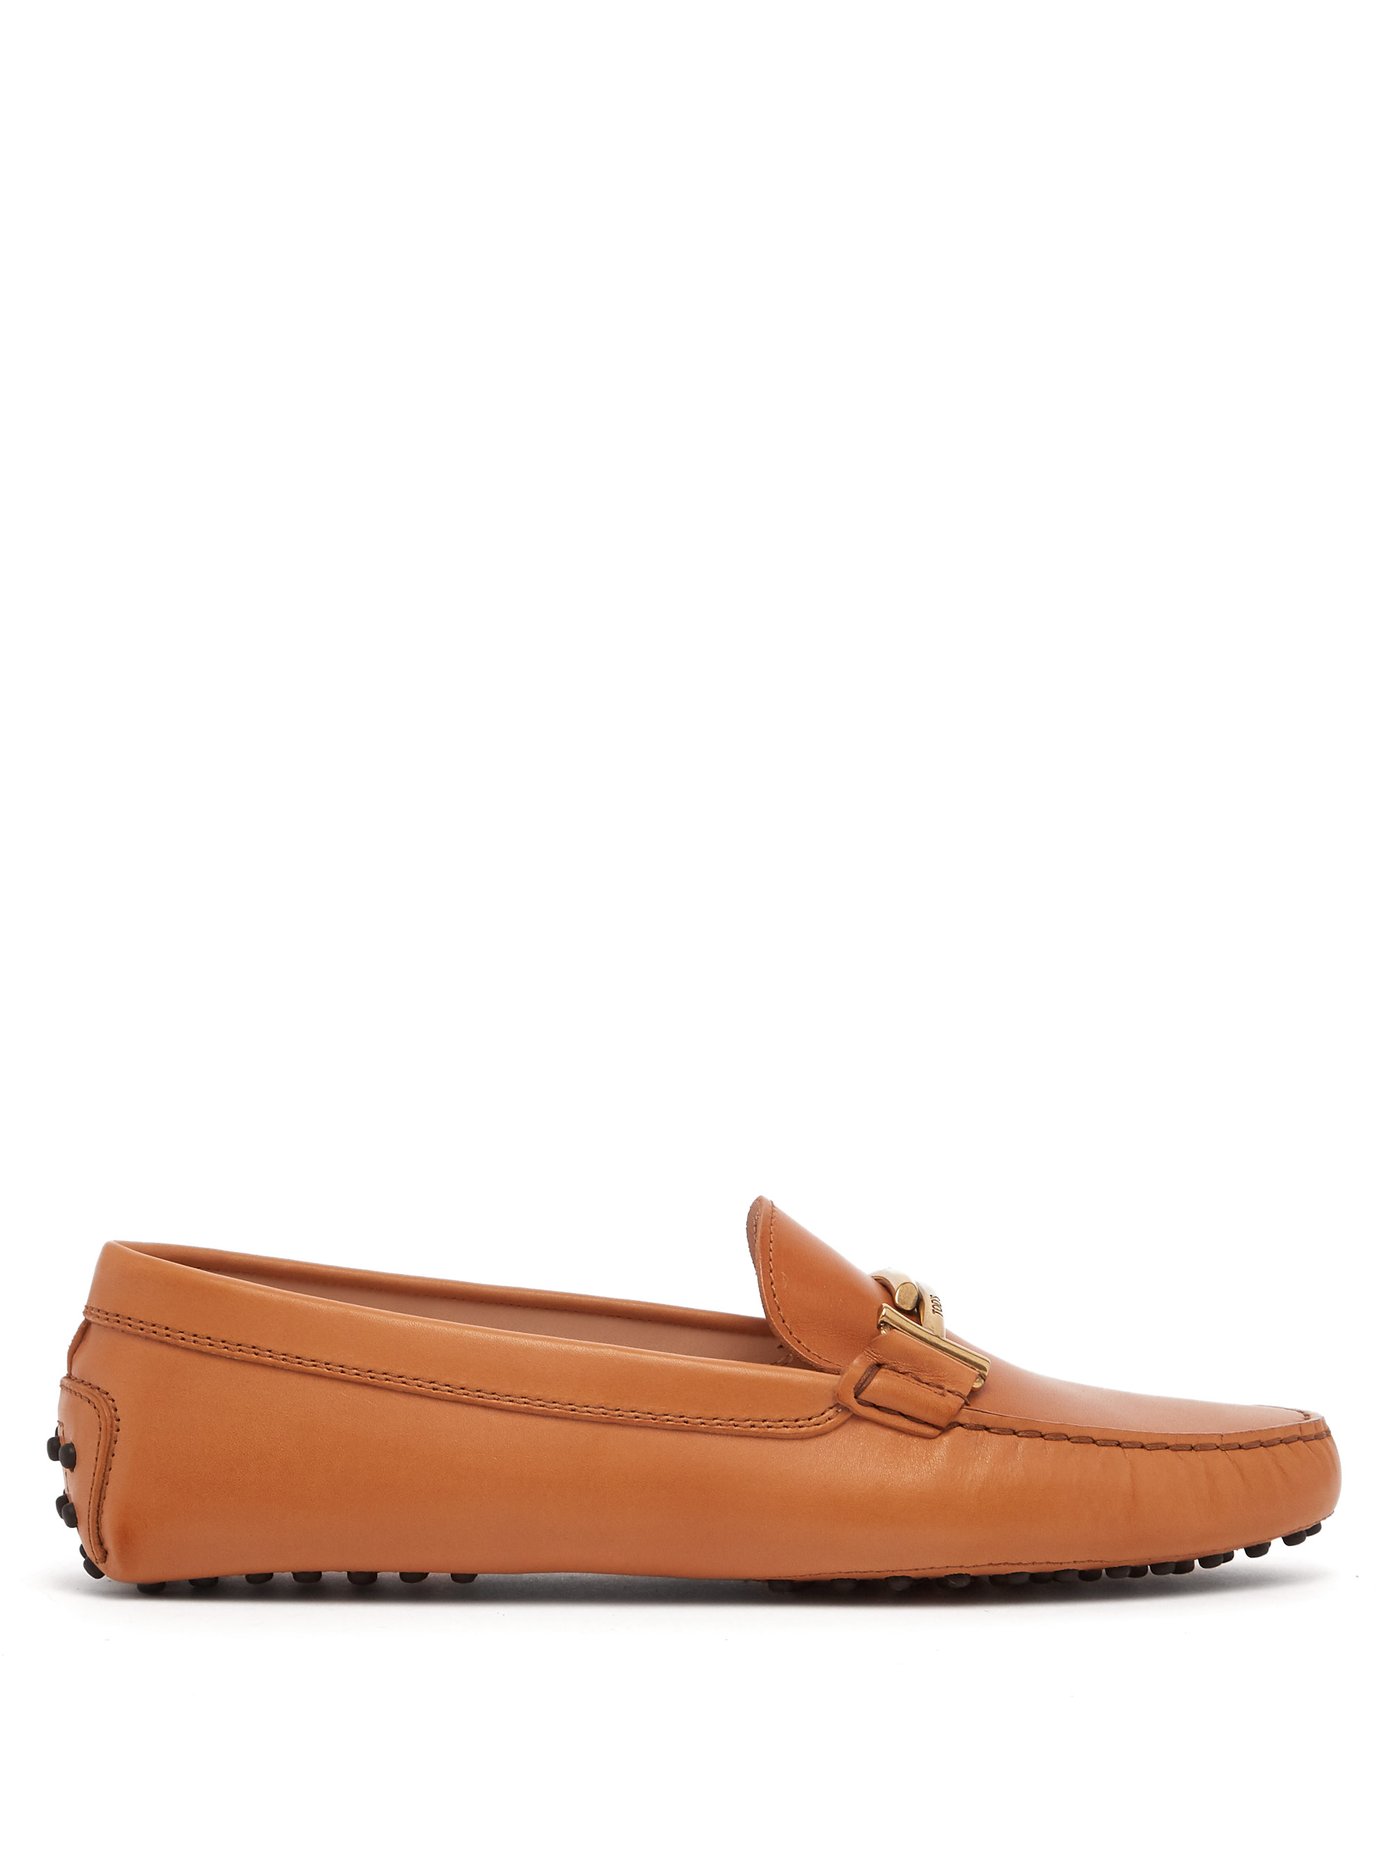 jp tods womens loafers